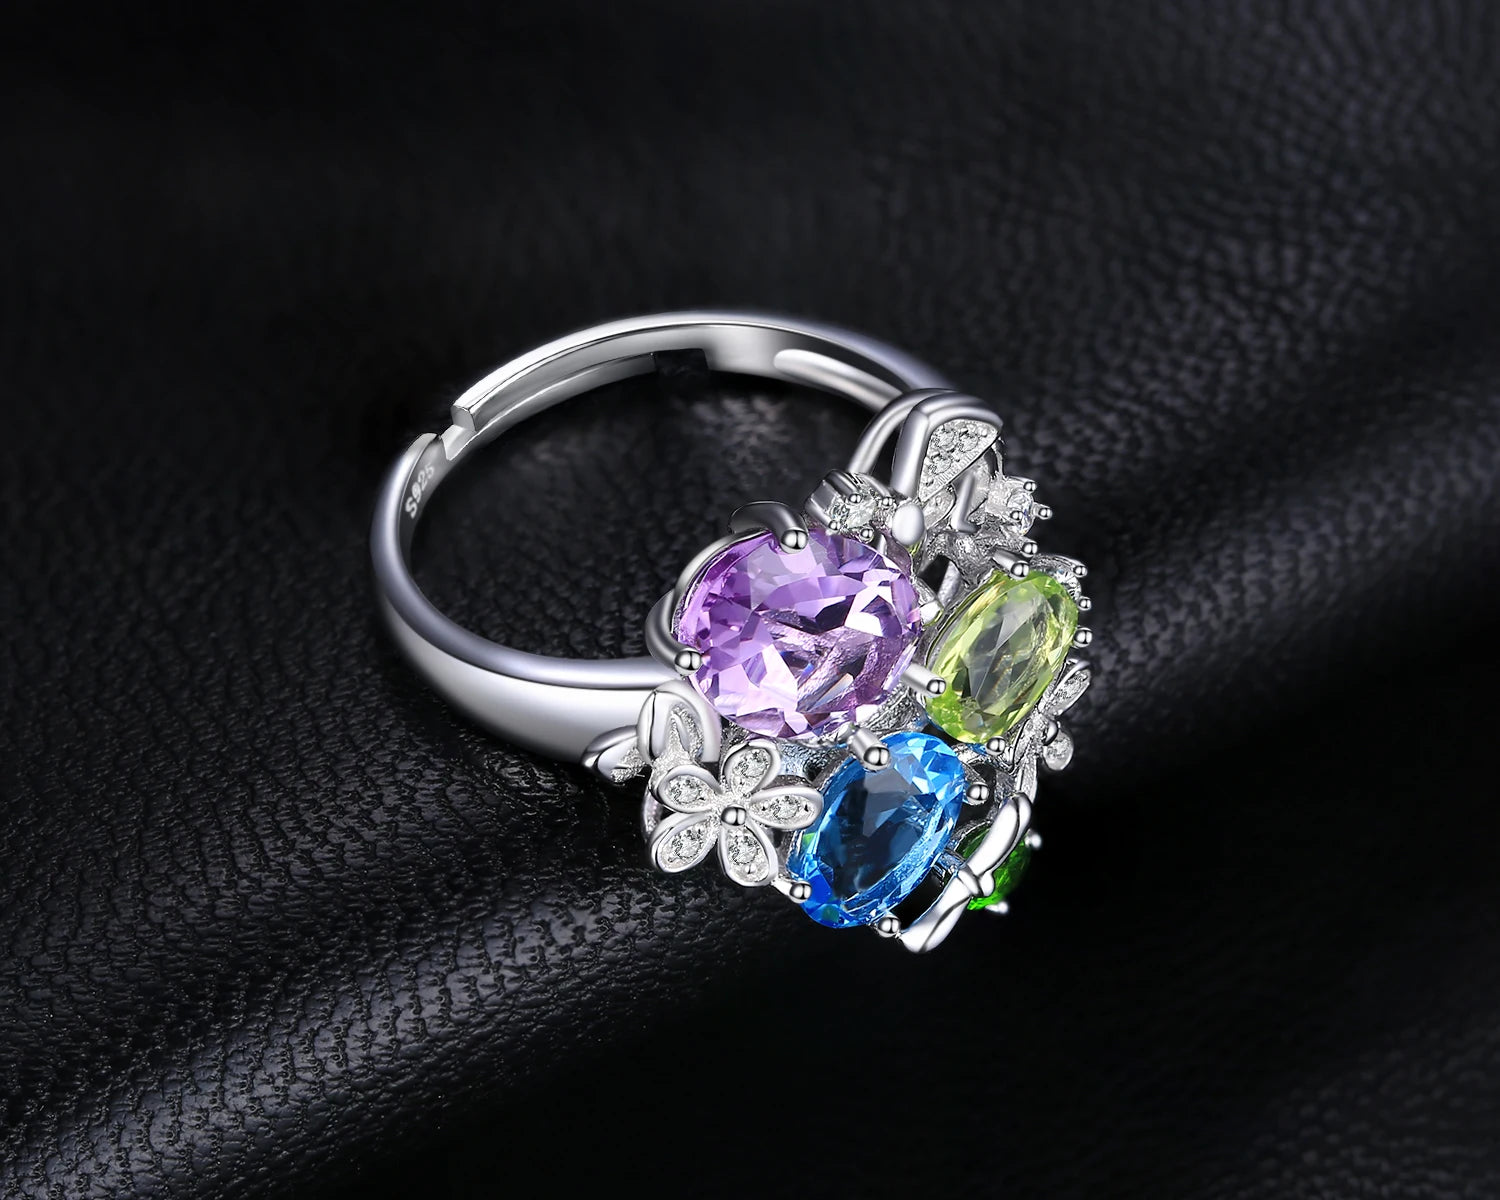 JewelryPalace Flower Natural Amethyst Blue Topaz Peridot Chrome Diopside Open Adjustable Cocktail Ring 925 Sterling Silver Women